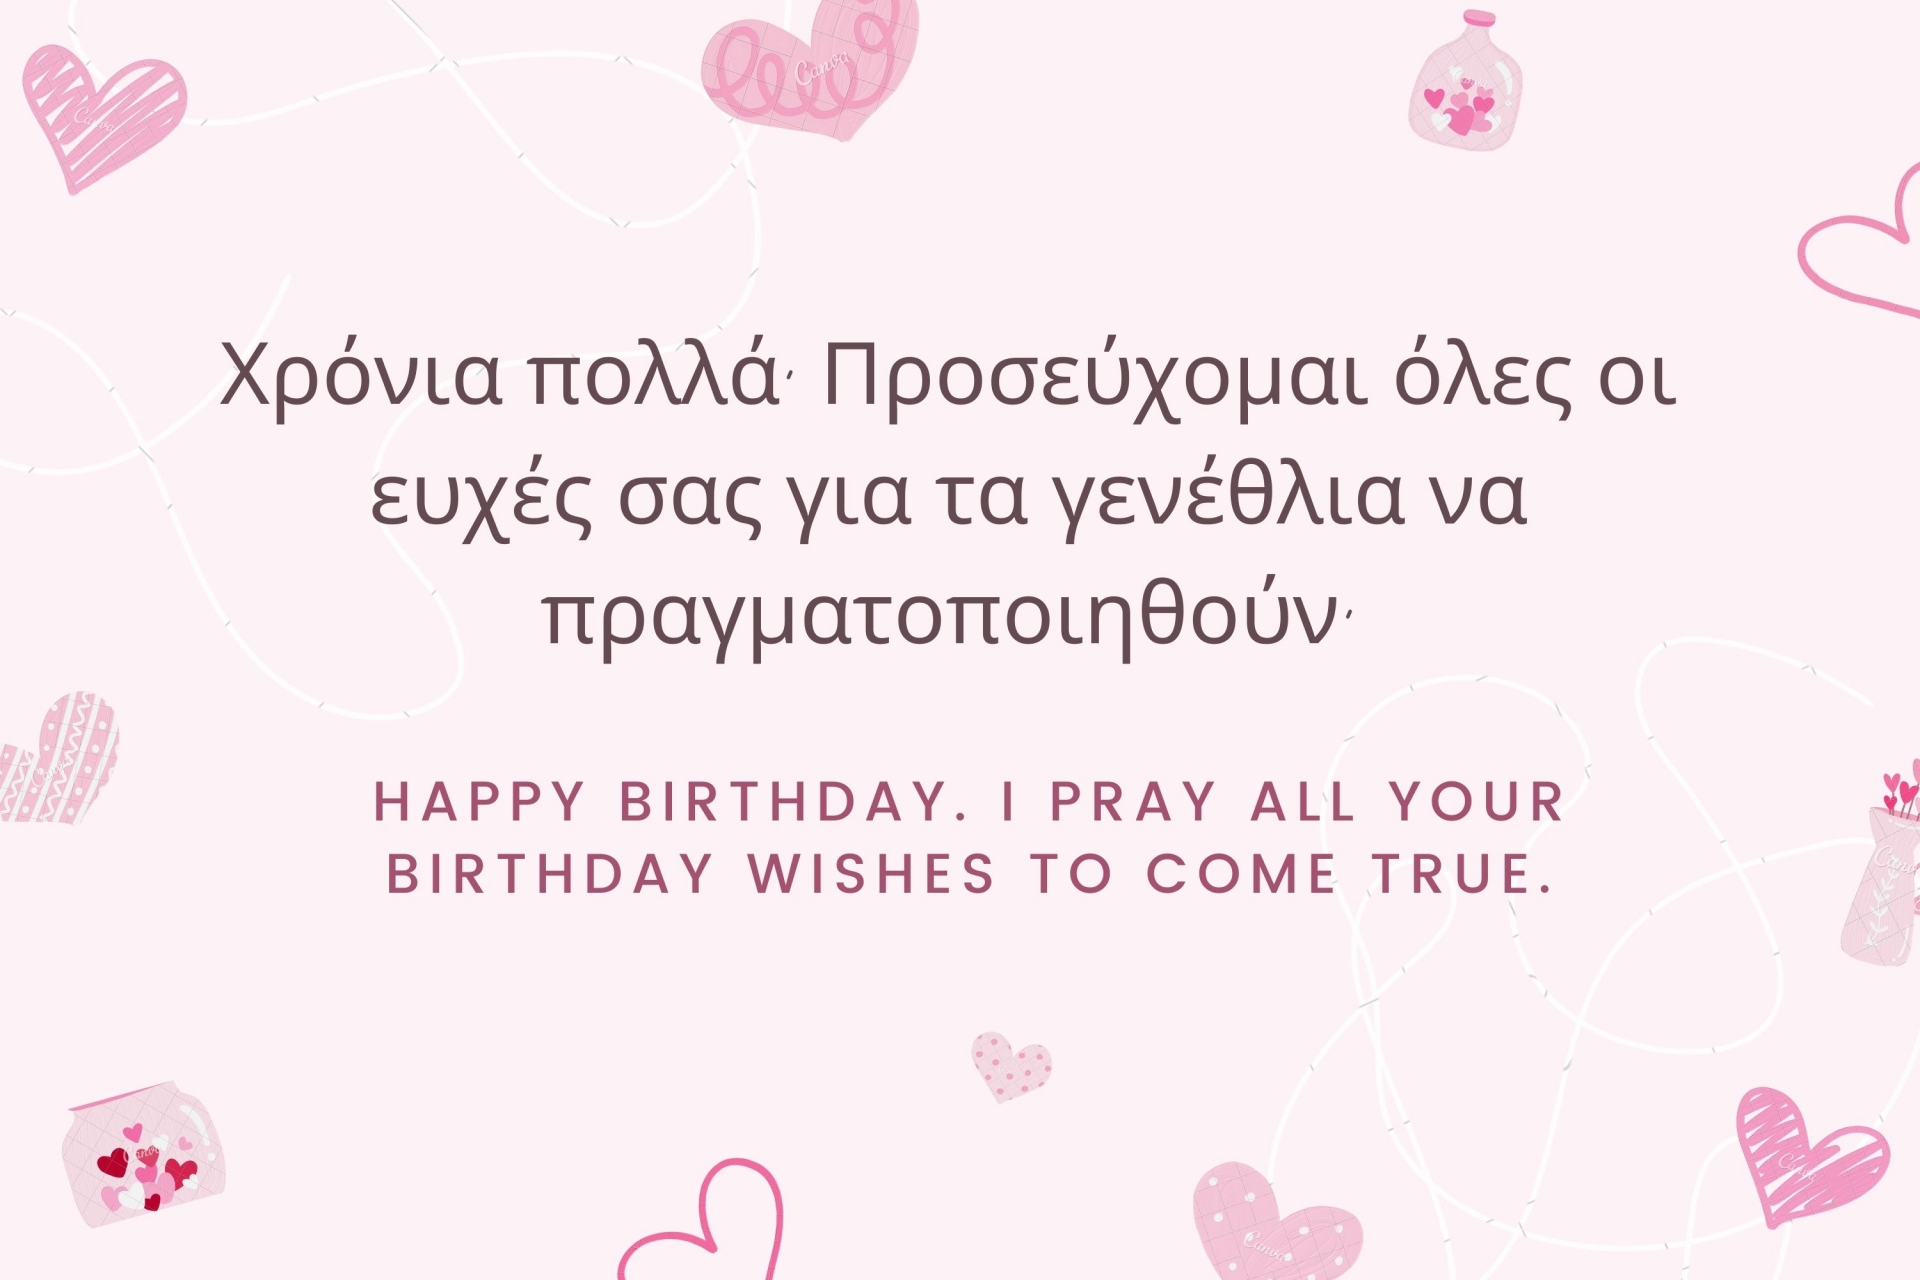 How to Say Happy Birthday in Greek - Best Wishes, Quotes and Popular Song in Greek Version